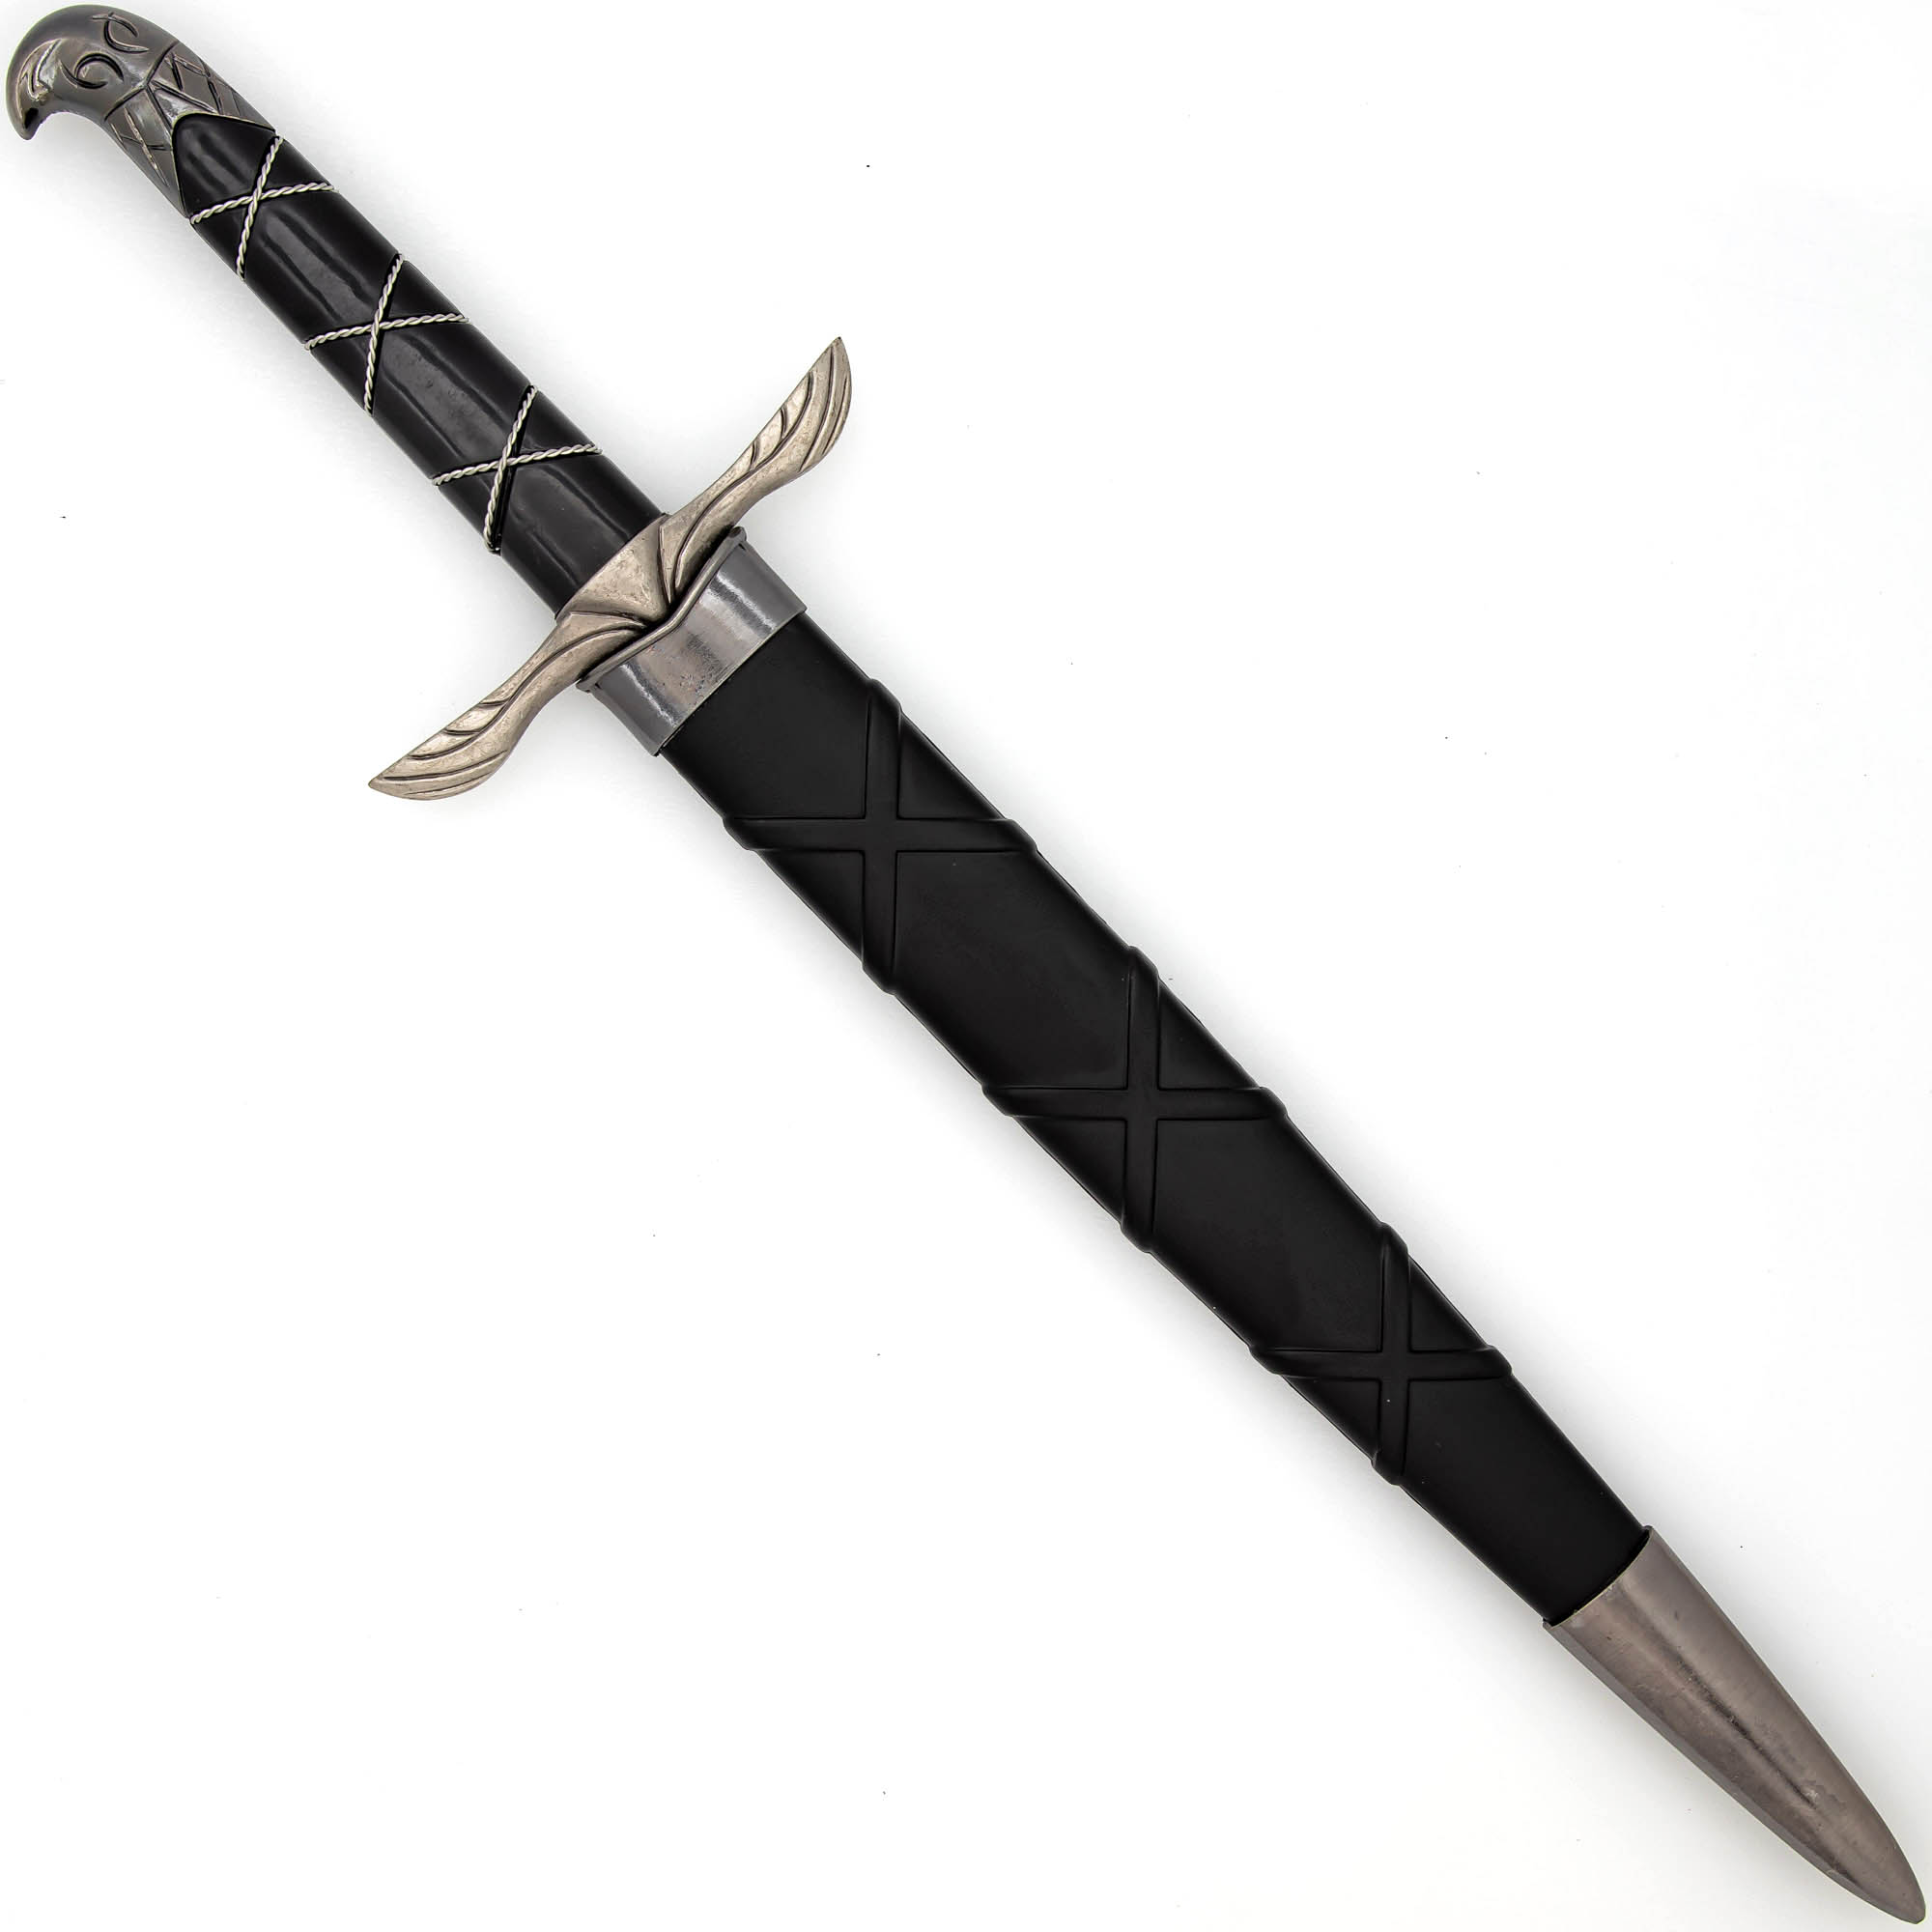 2713 Trespass on Sky Medieval Arming Dagger Knightly Cost Historical Knife-img-1